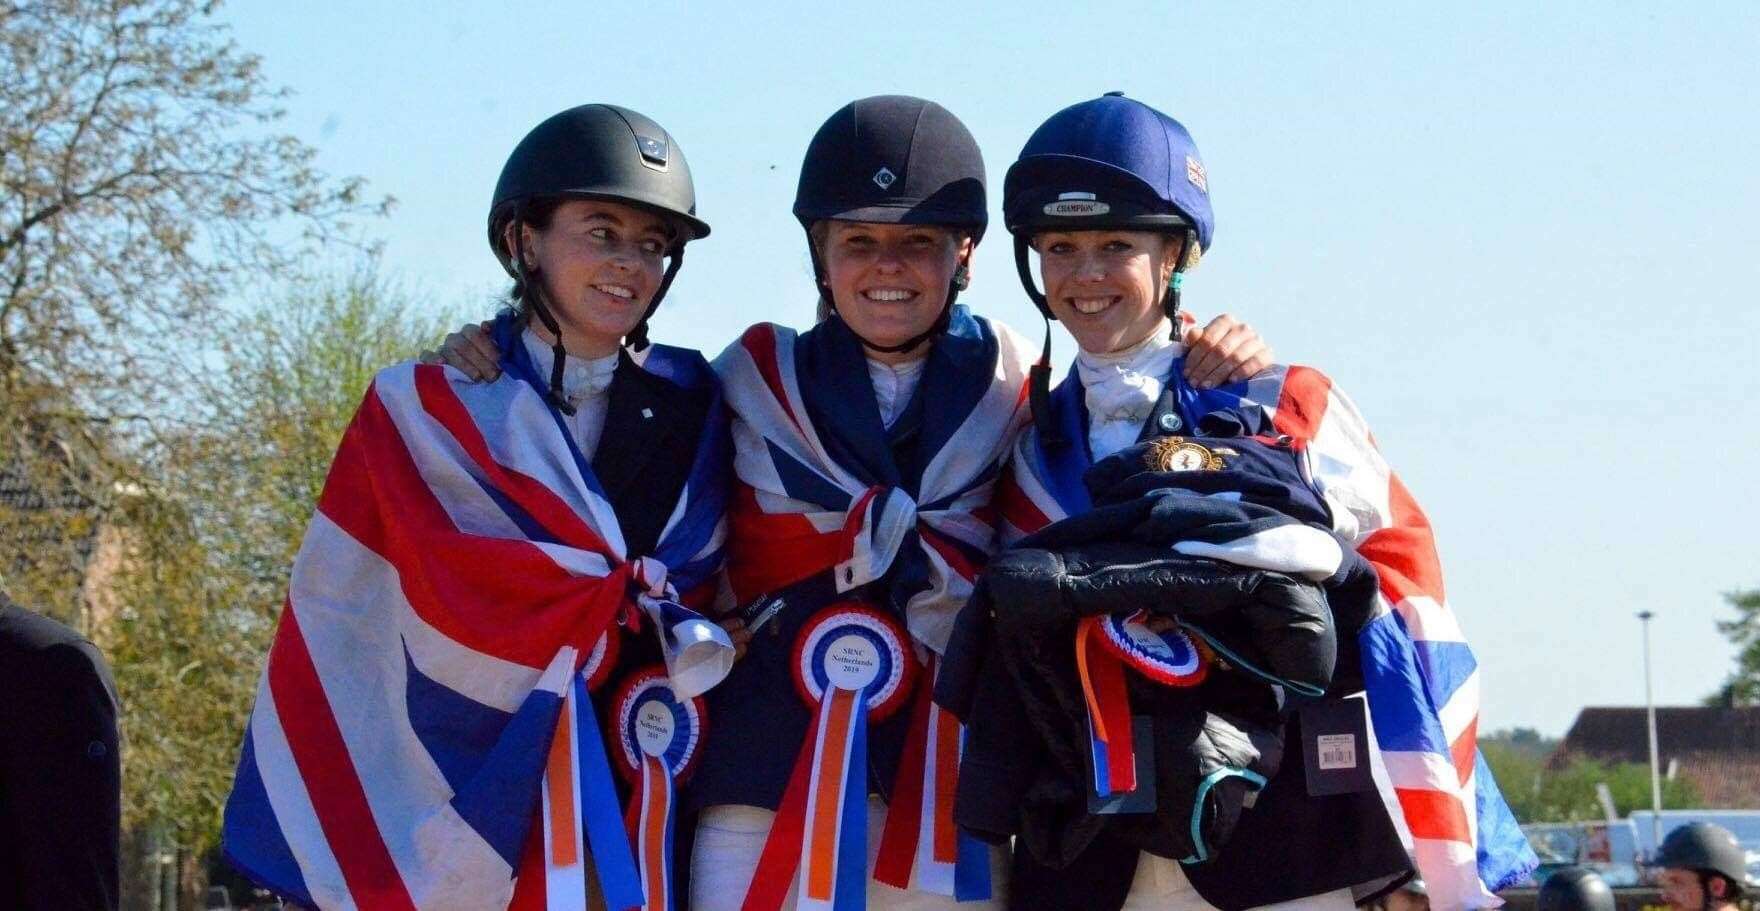 Sophia along with her team mates after winning the Student Riders Nations Cup in the Netherlands recently.